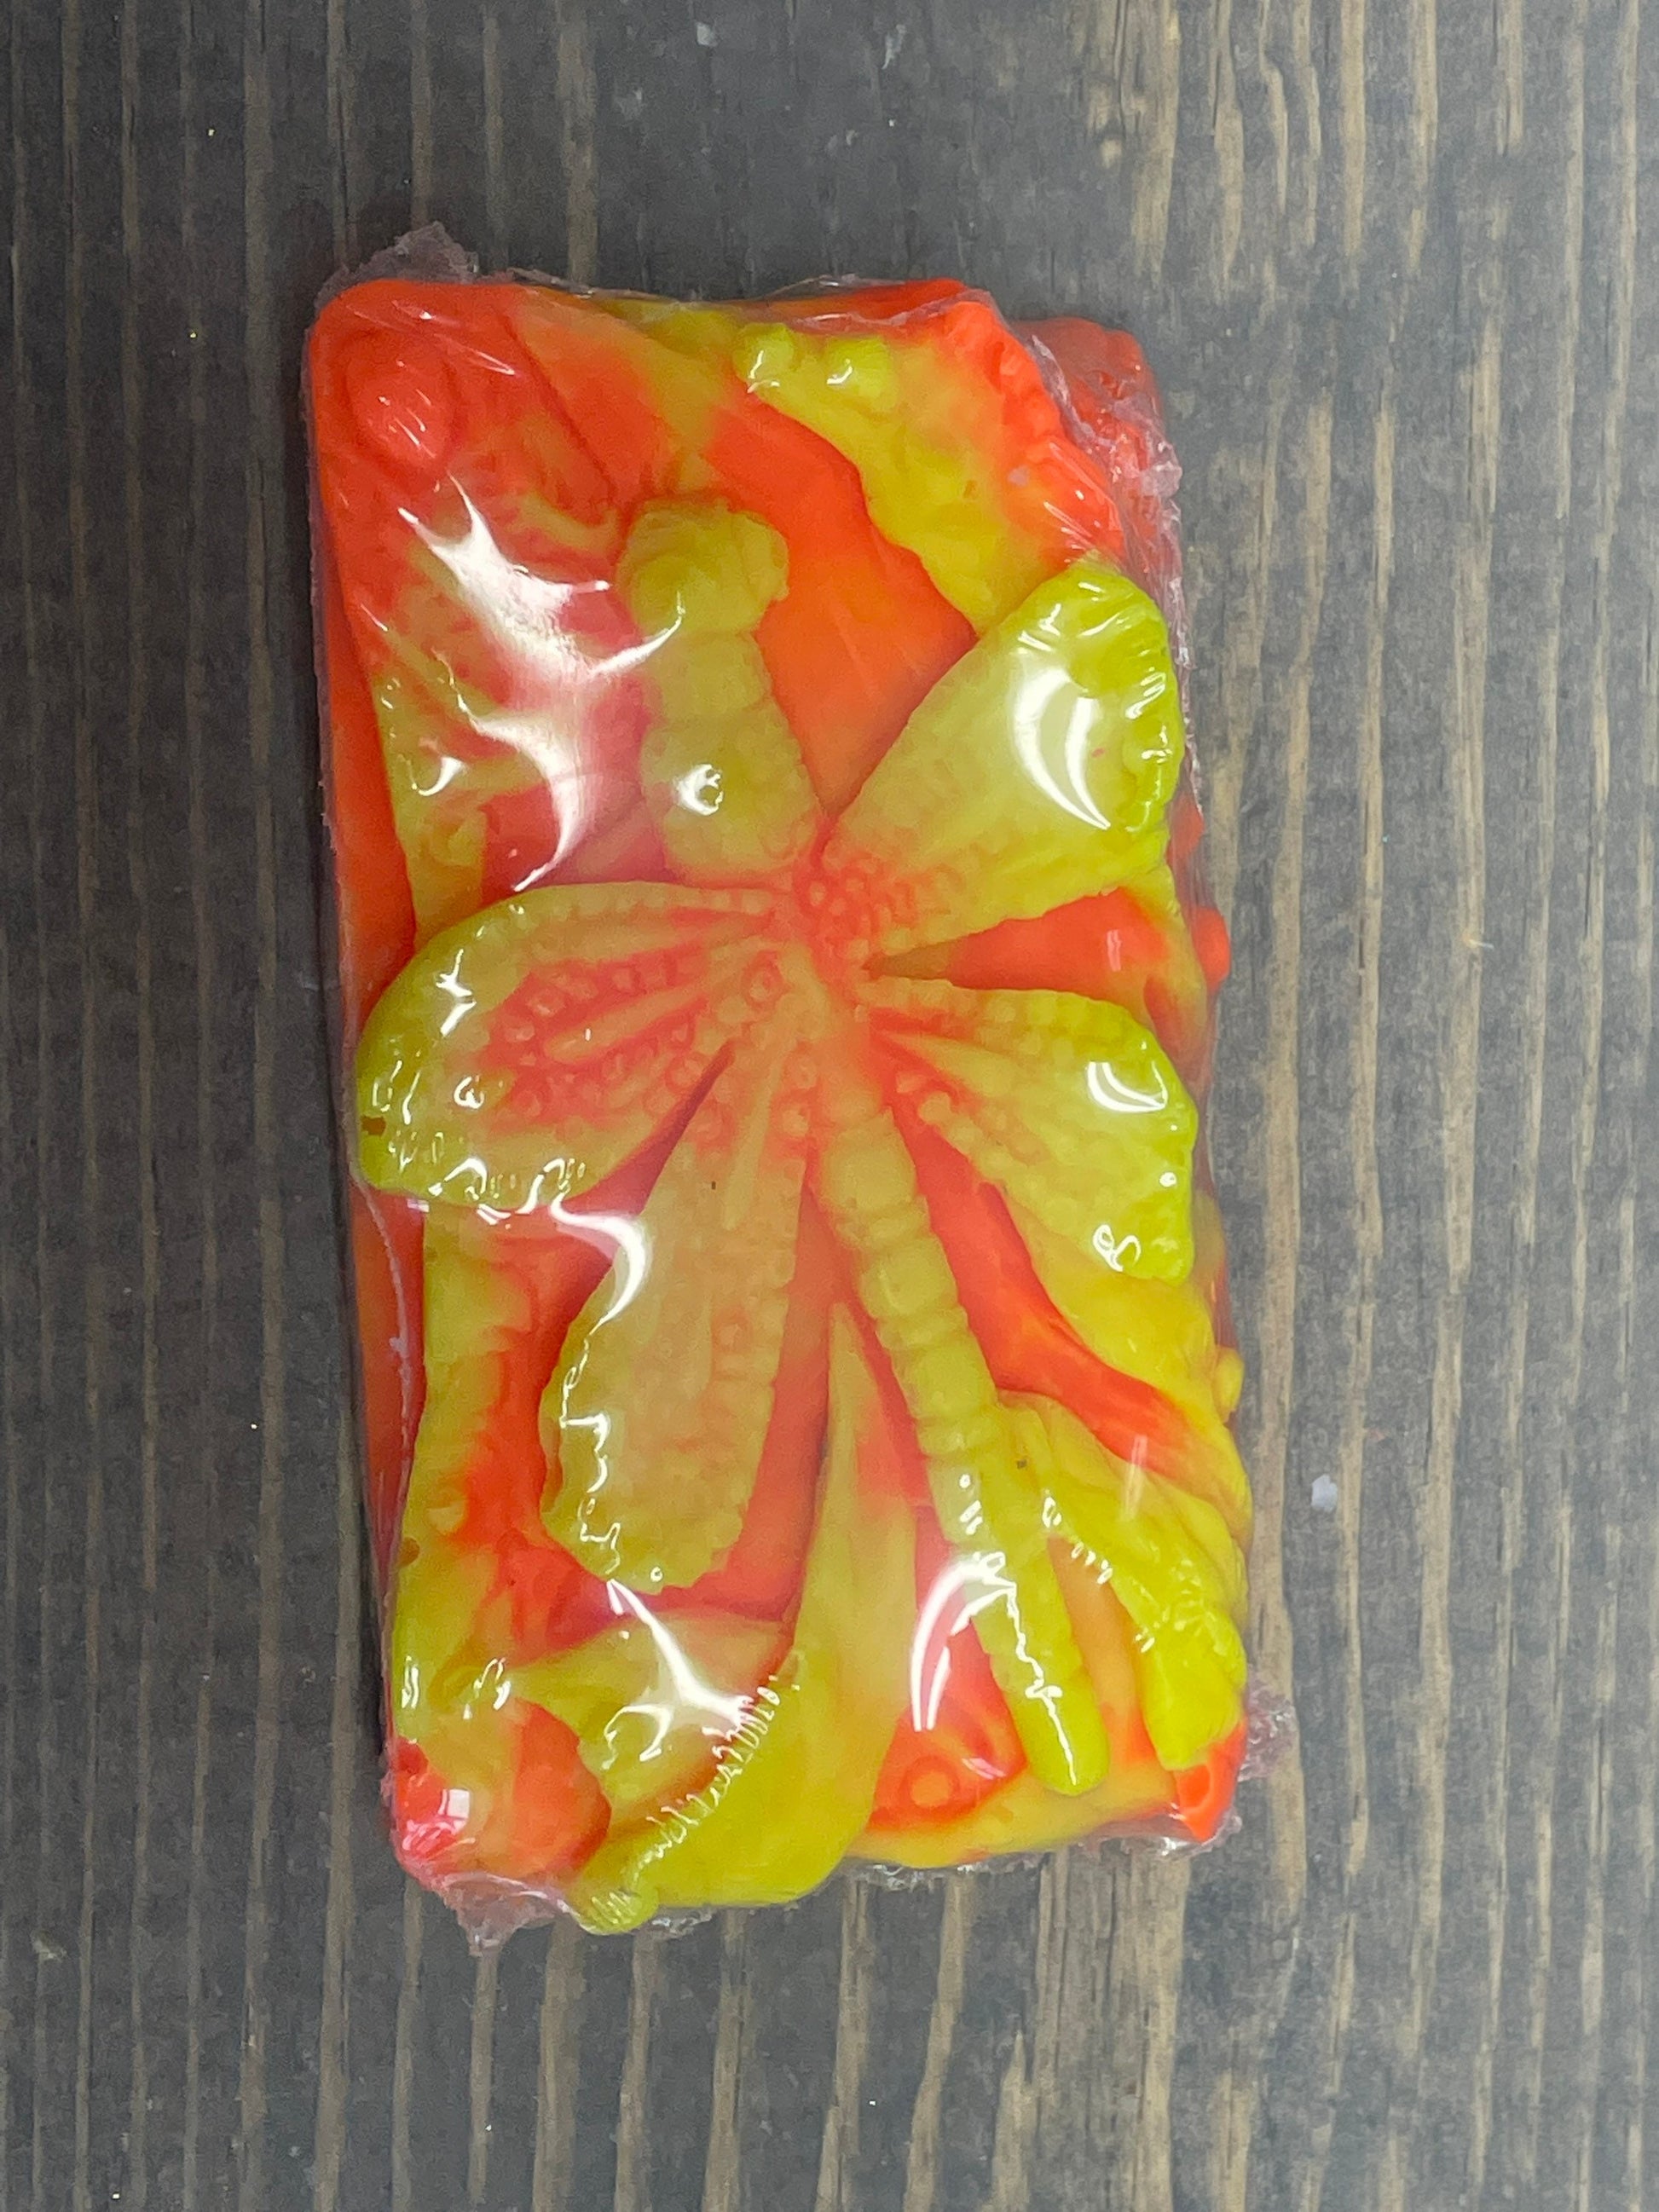 A photo of Dragonfly soap bar